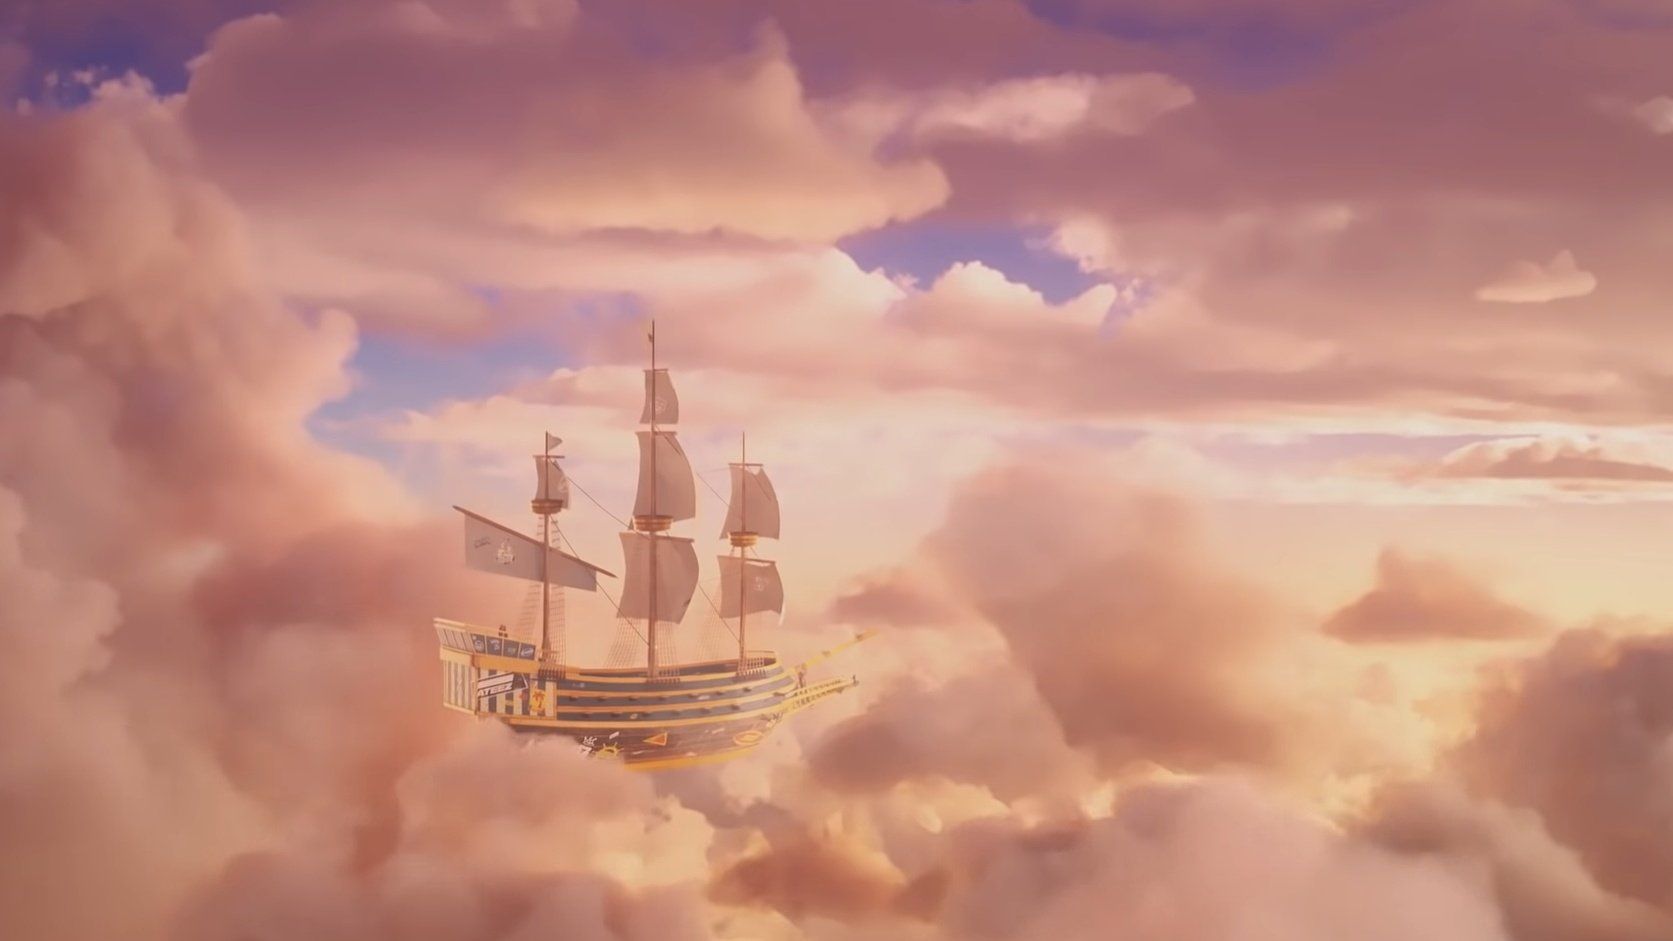 A ship sails through the clouds in the sky - Angelcore